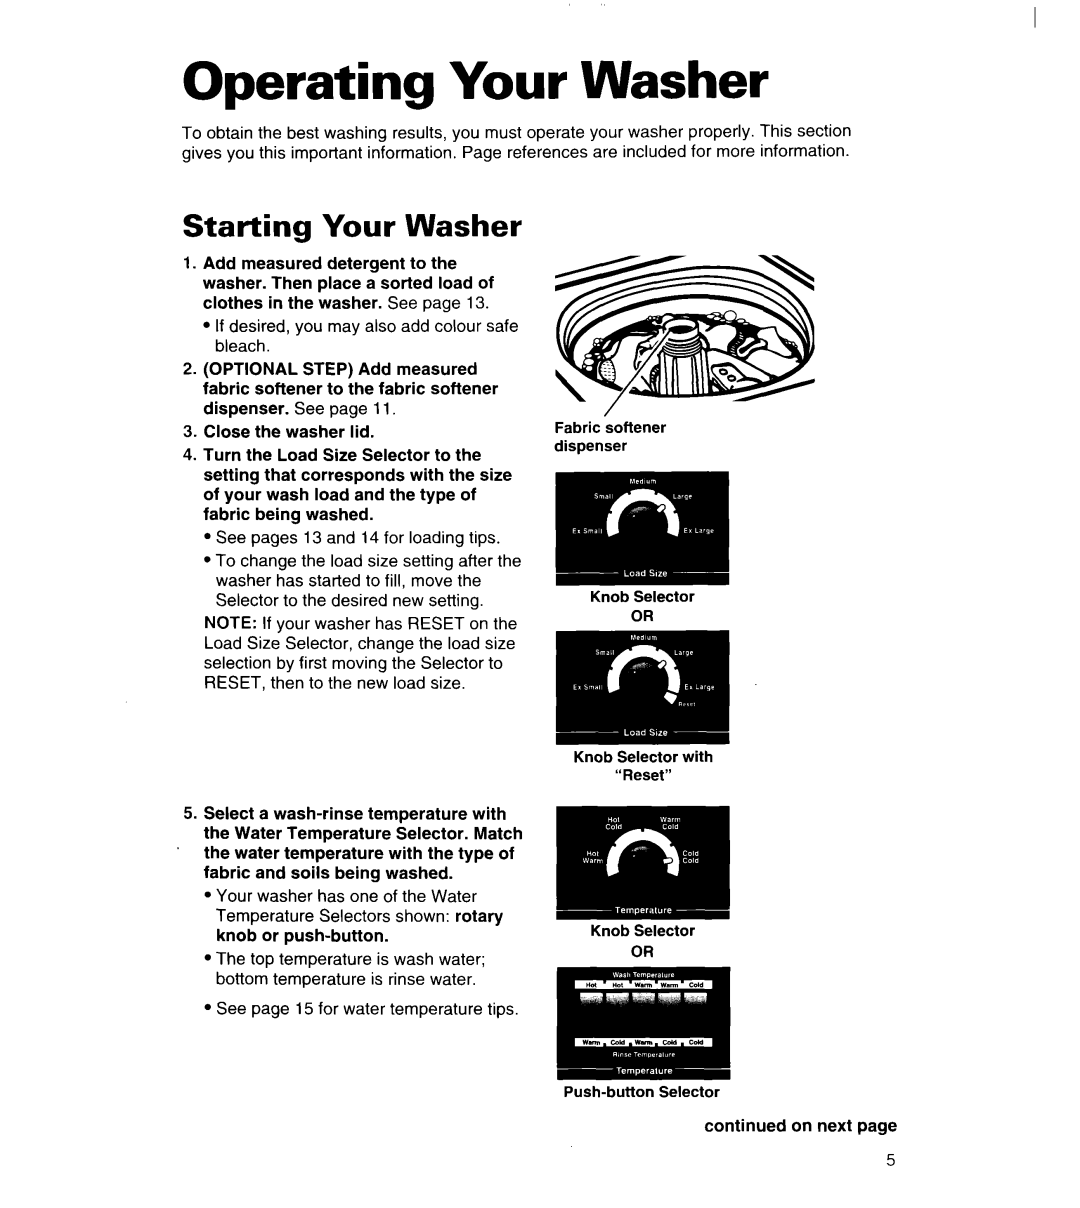 Whirlpool 3363834 warranty Operating Your Washer, Starting Your Washer 